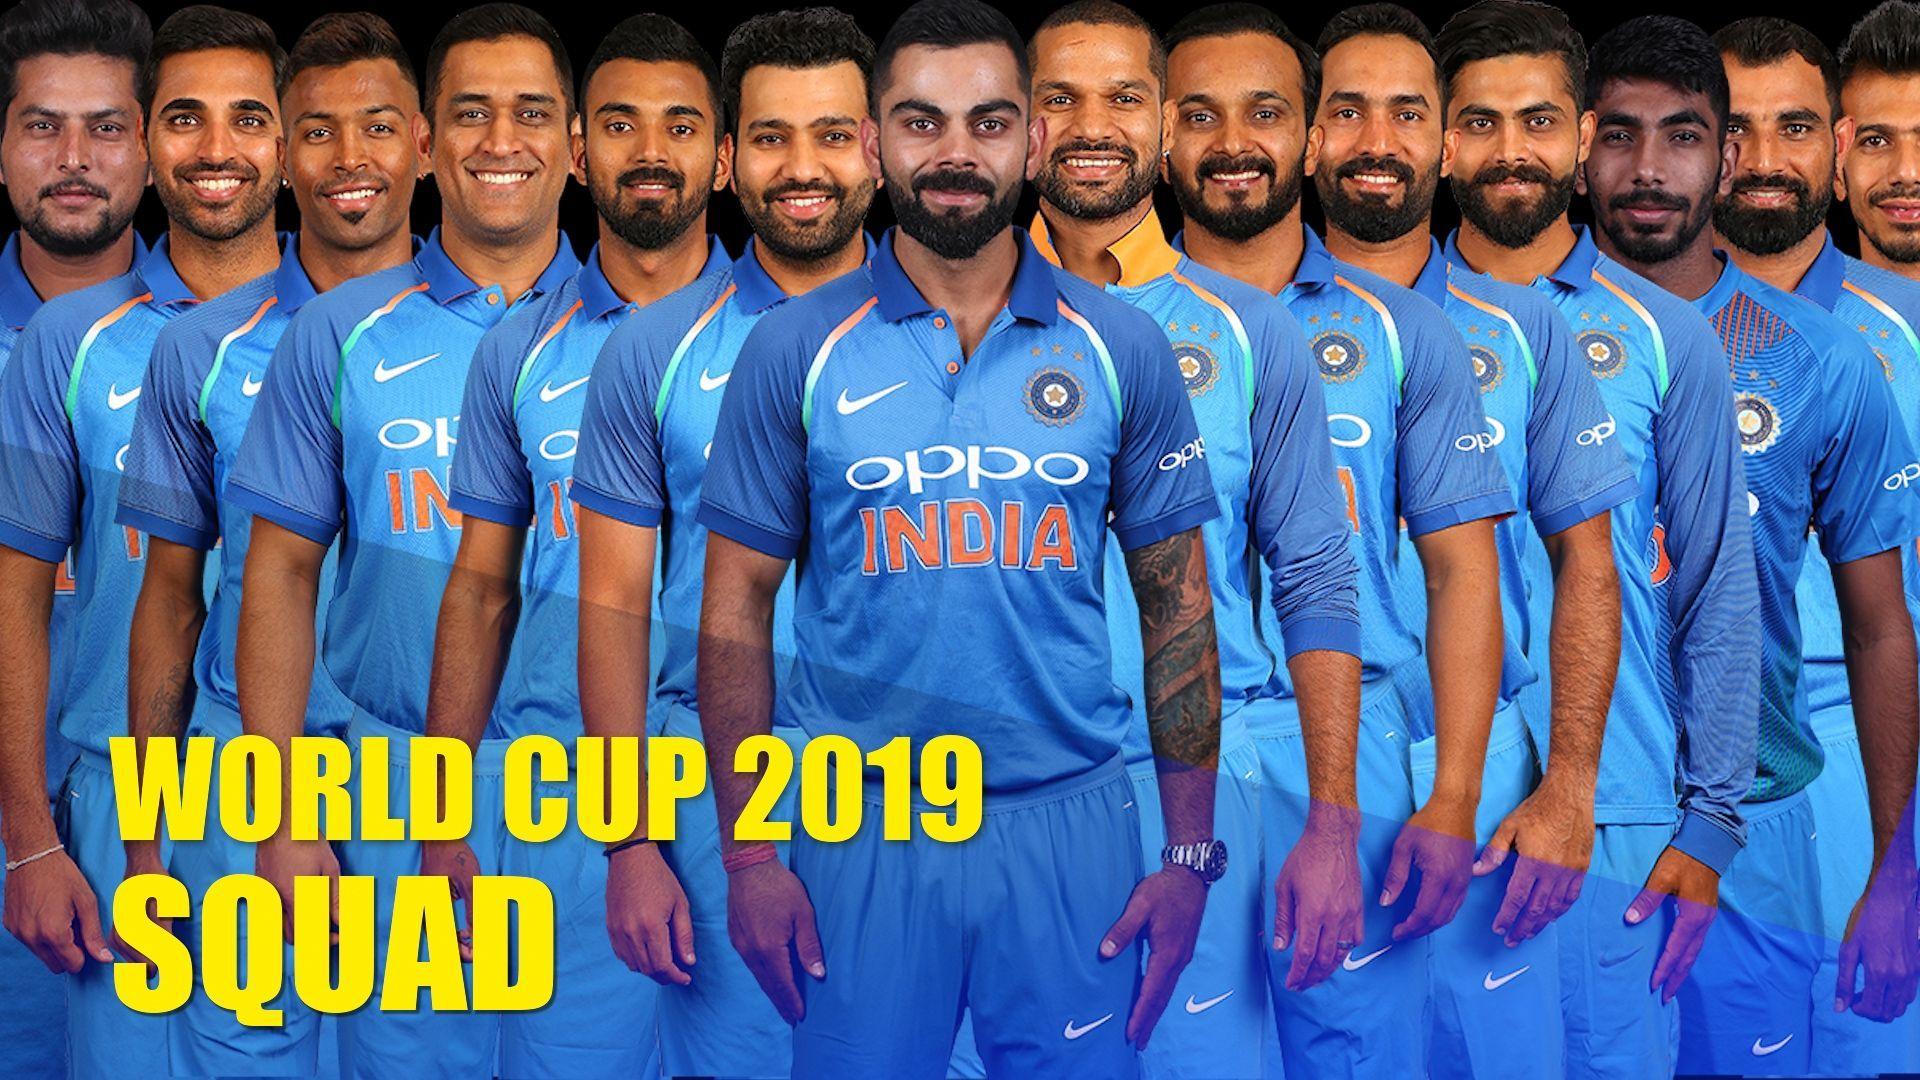 Icc World Cup 2019 Wallpapers Wallpaper Cave 6492